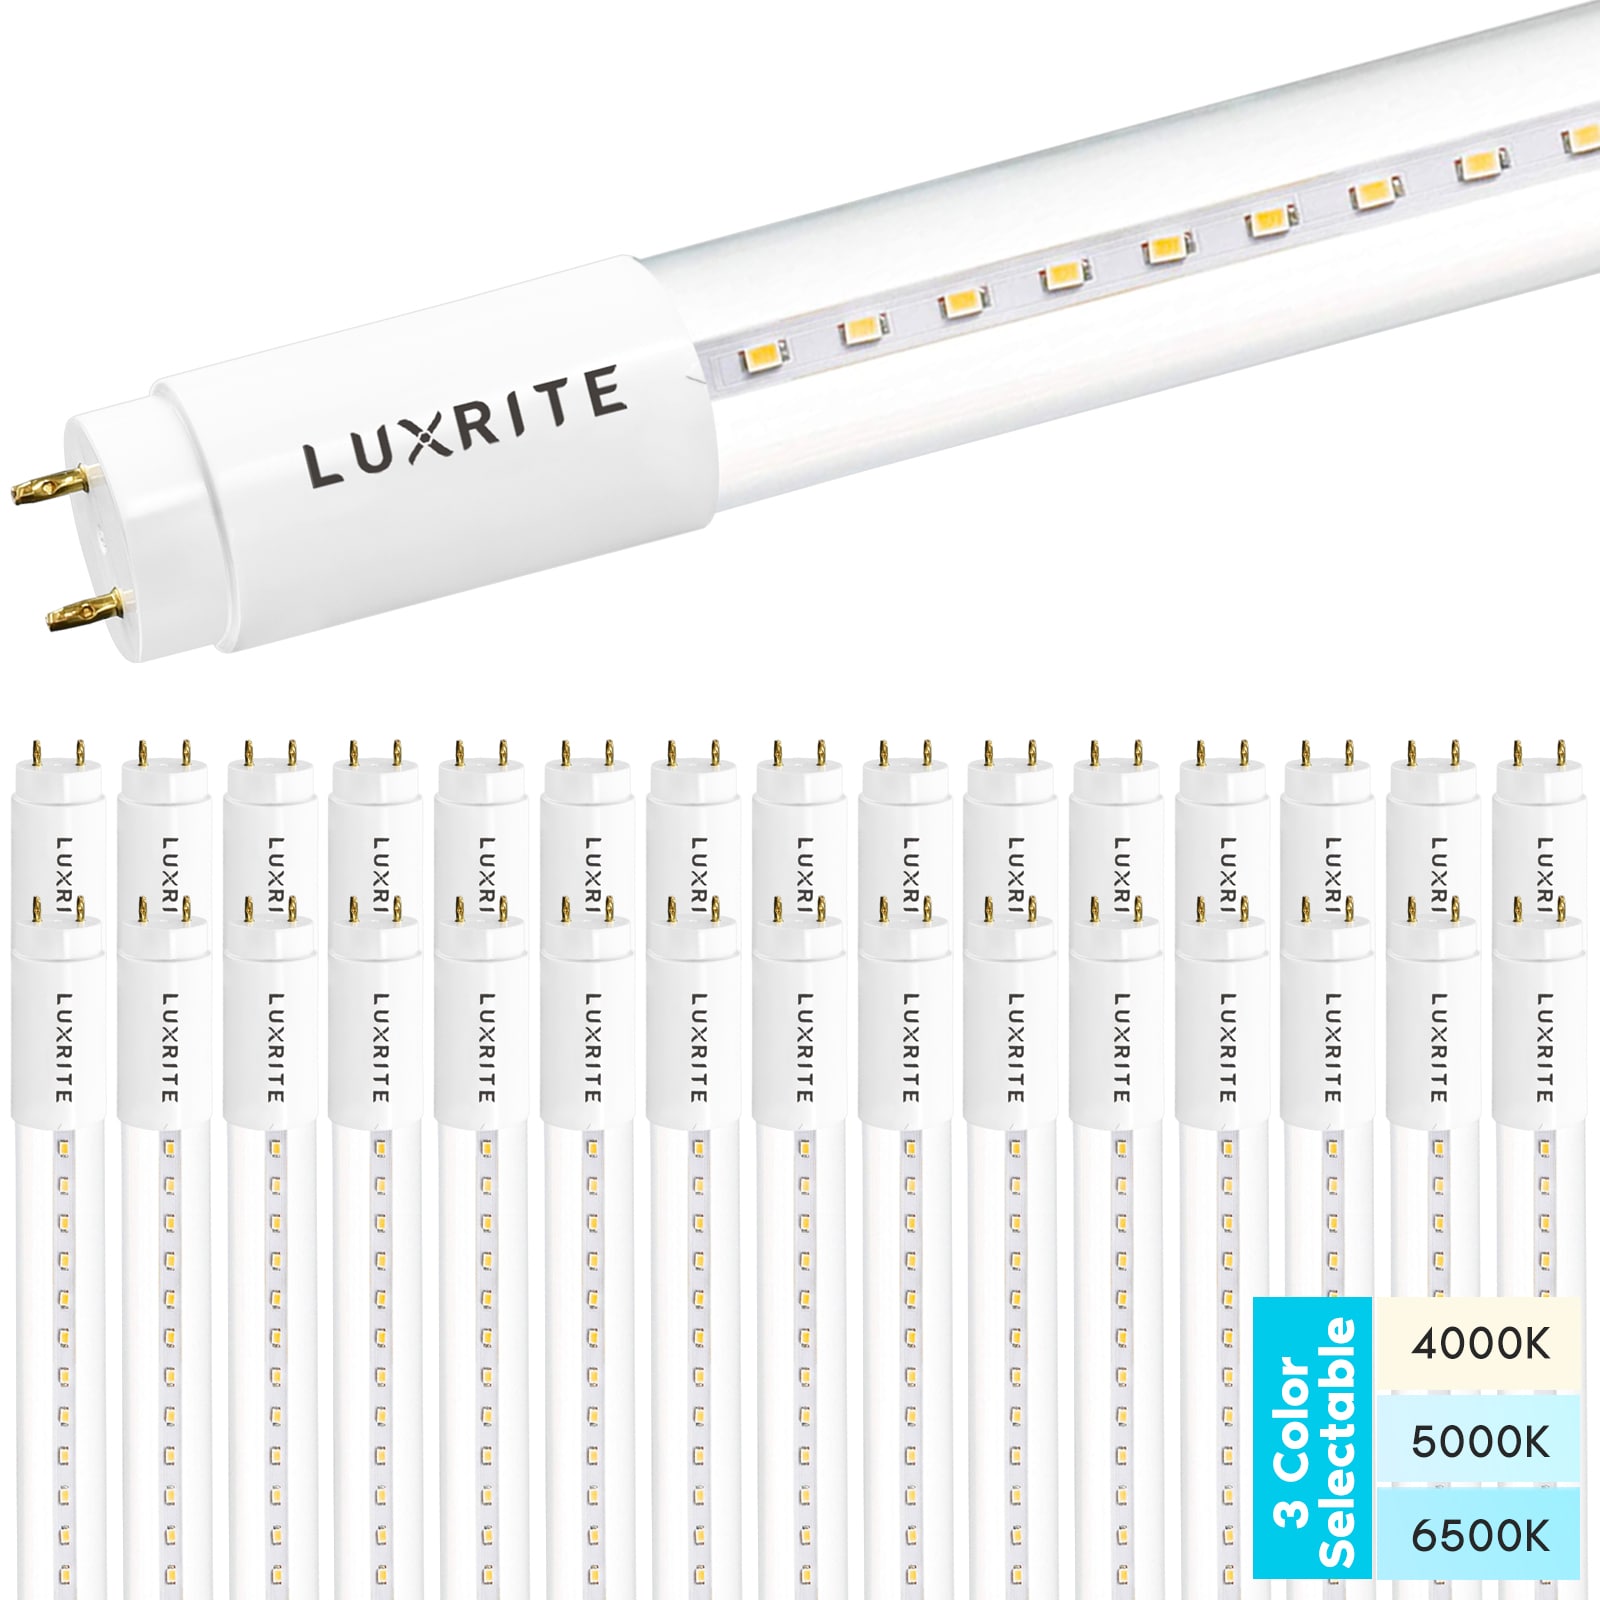 LED Linear tube (Dimmable) 046677534165